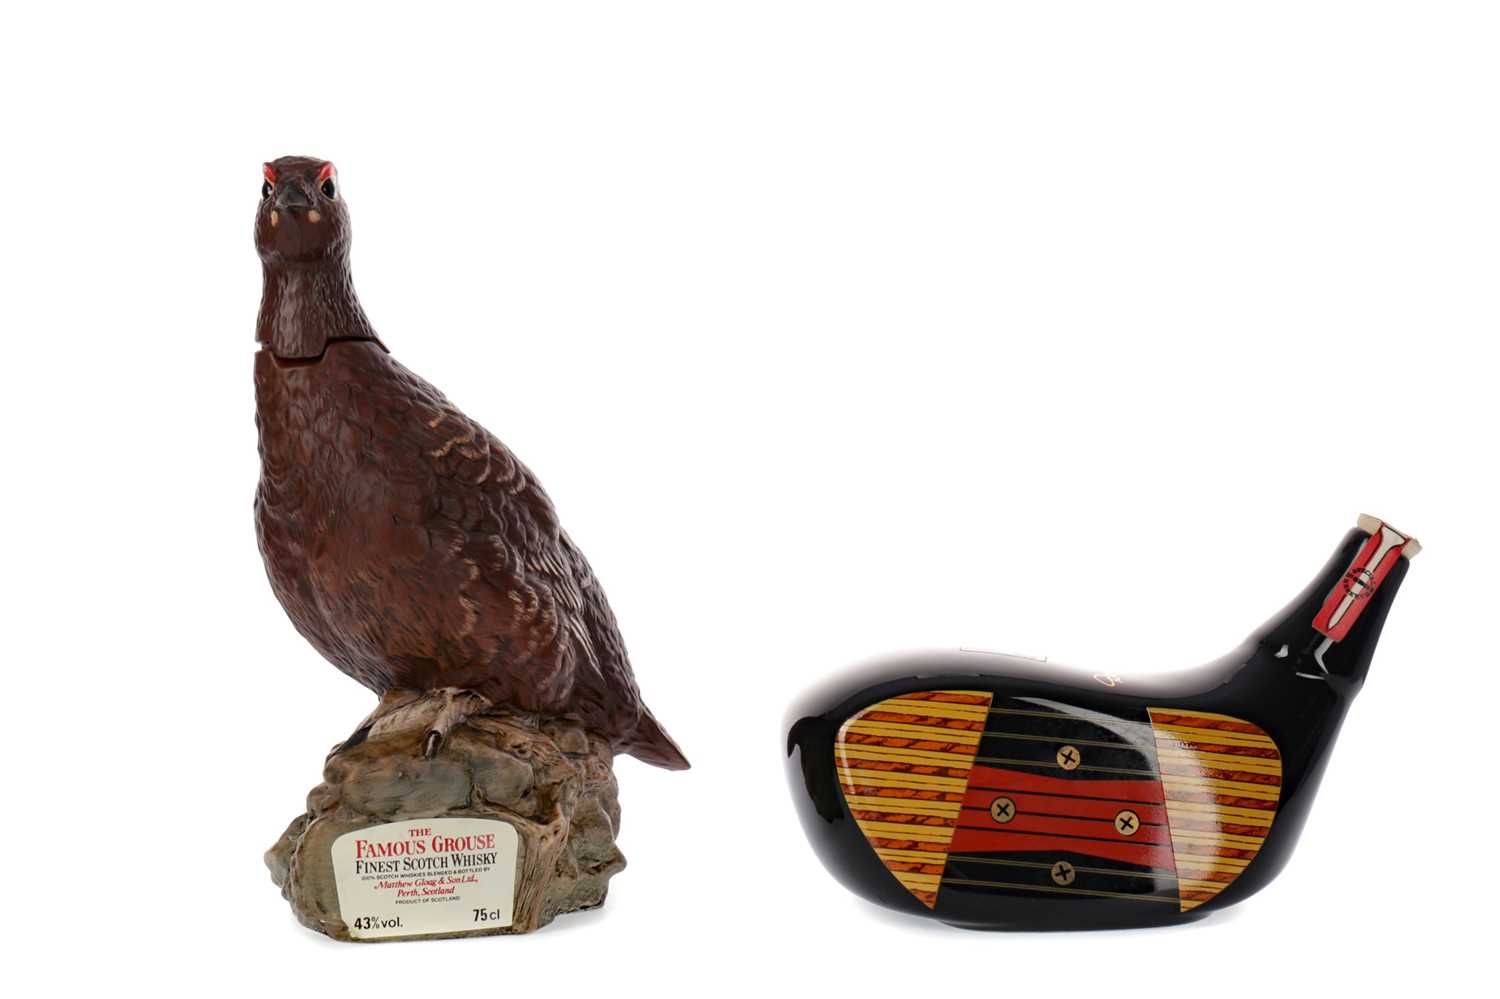 Lot 12 - MCGIBBON'S DRIVER HEAD DECANTER AND FAMOUS GROUSE DECANTER